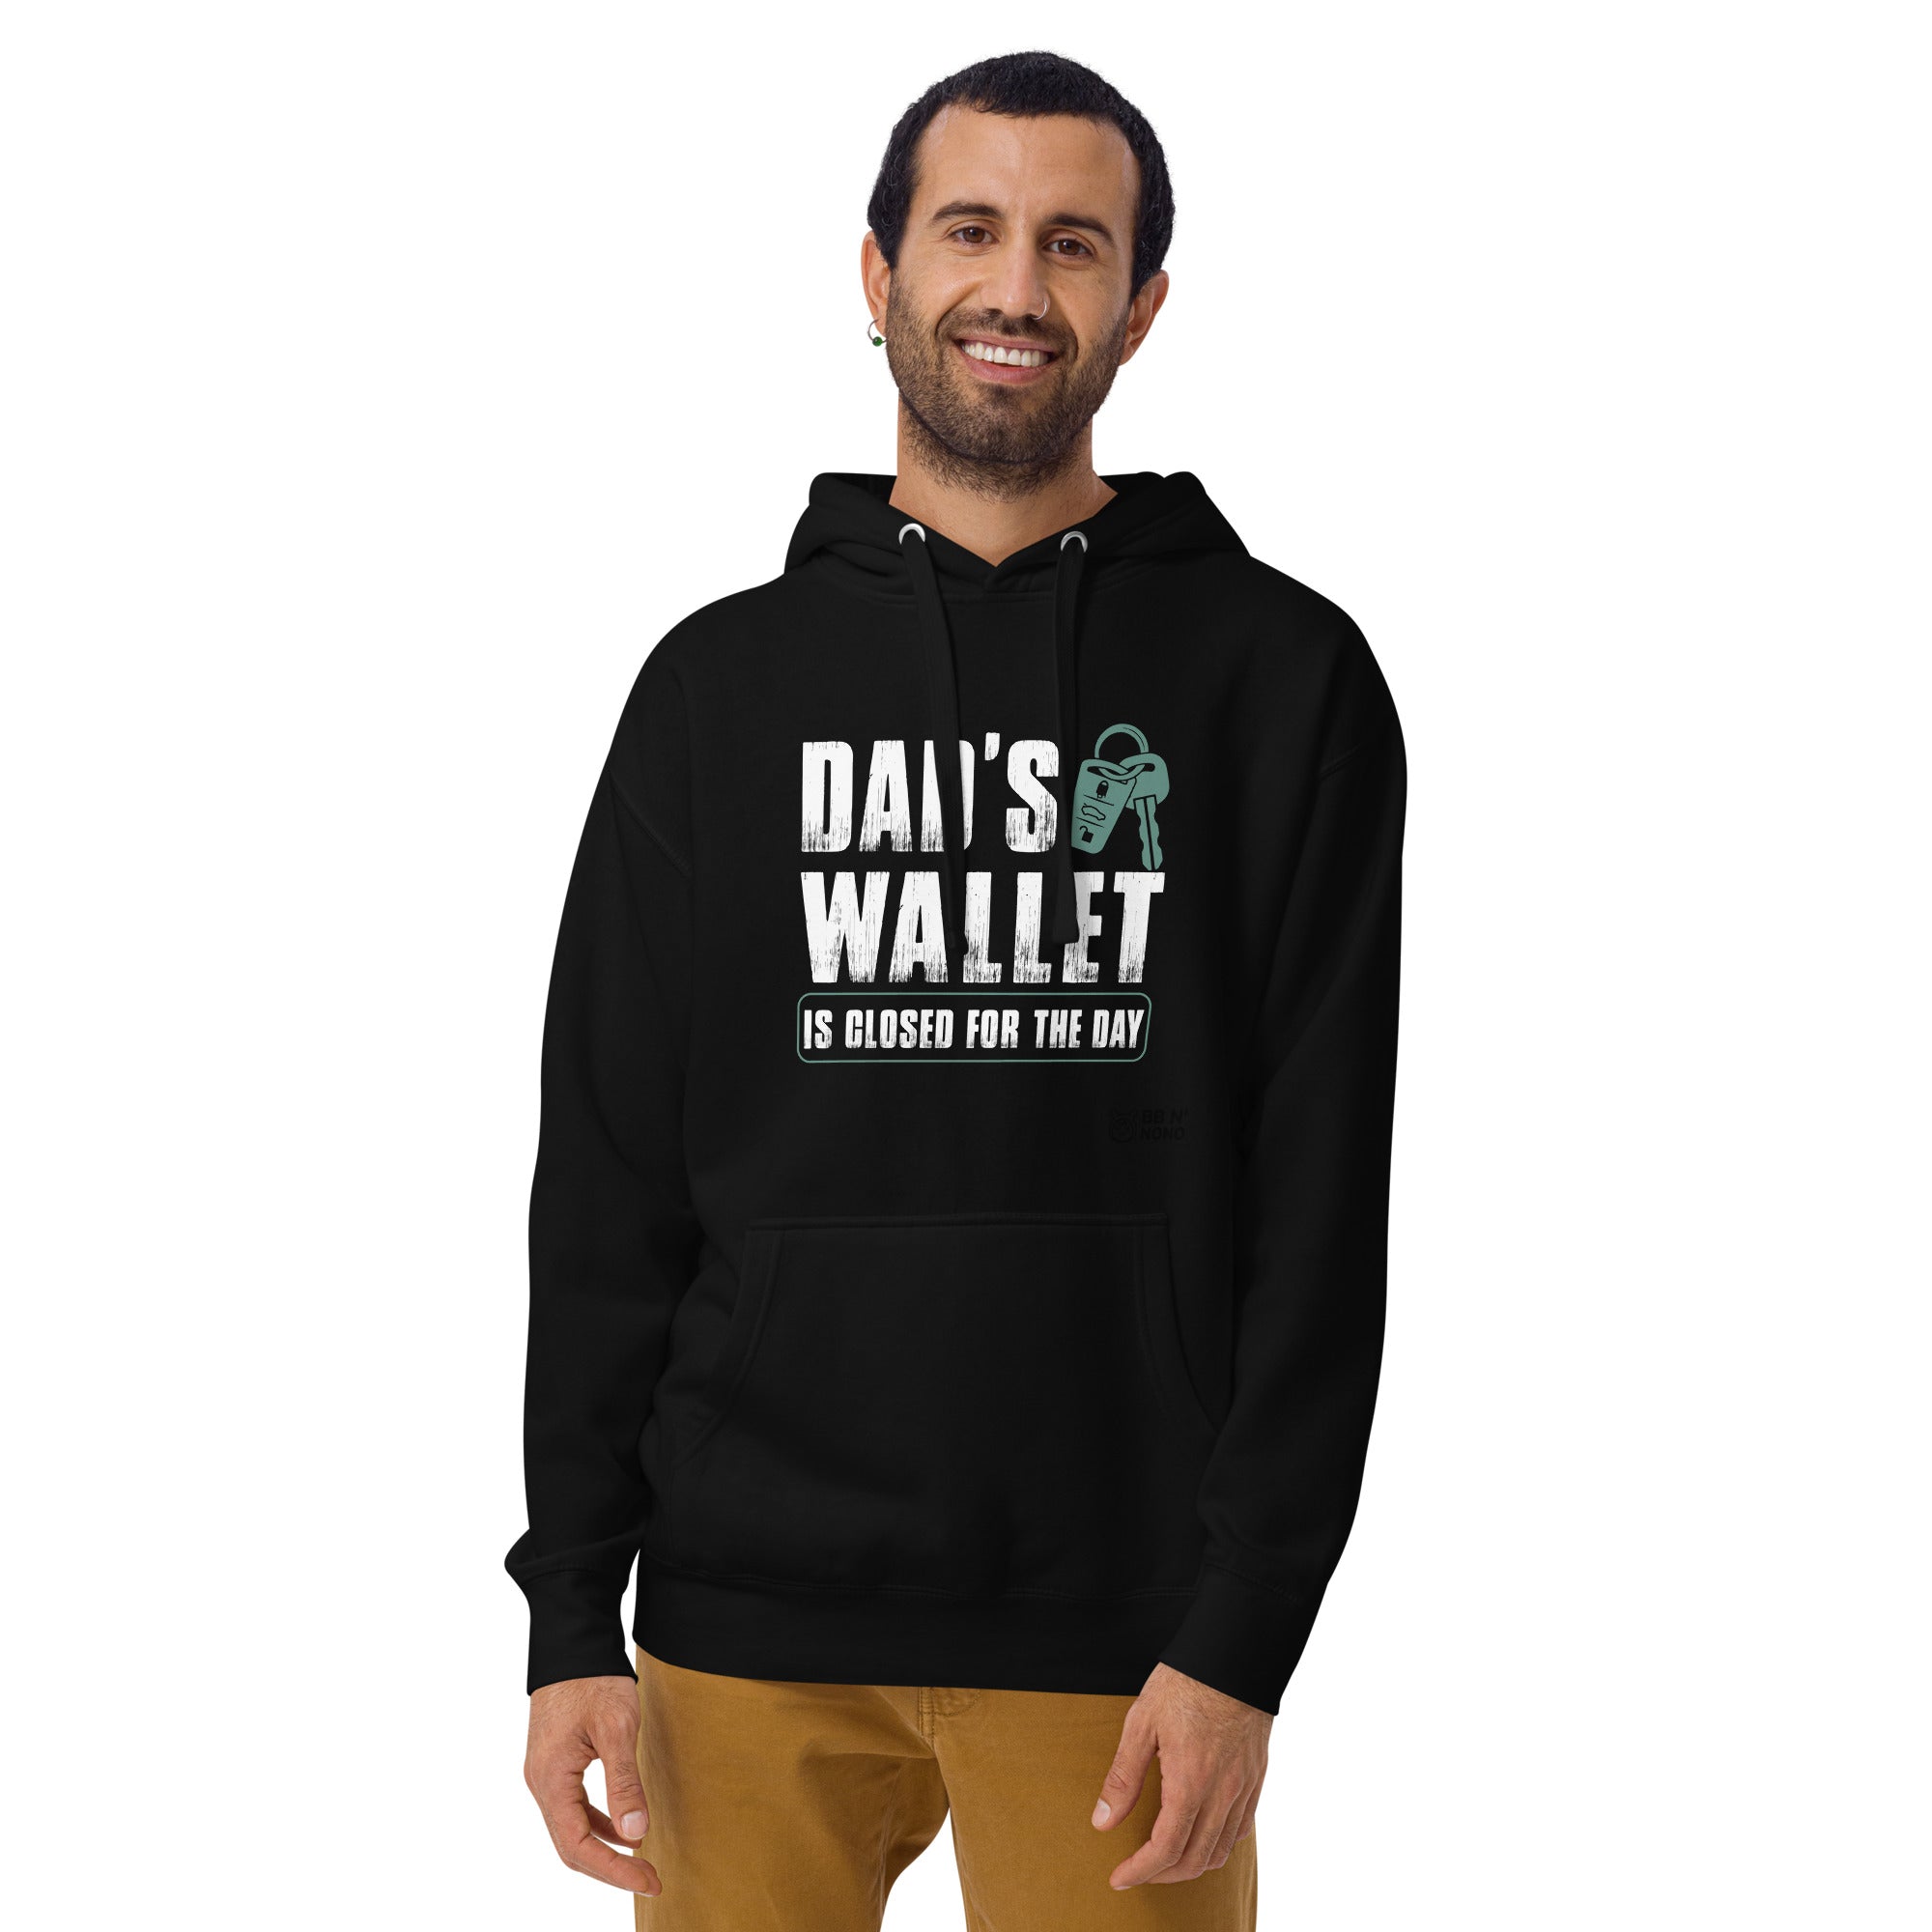 Dad's wallet is closed for the day - Unisex Hoodie